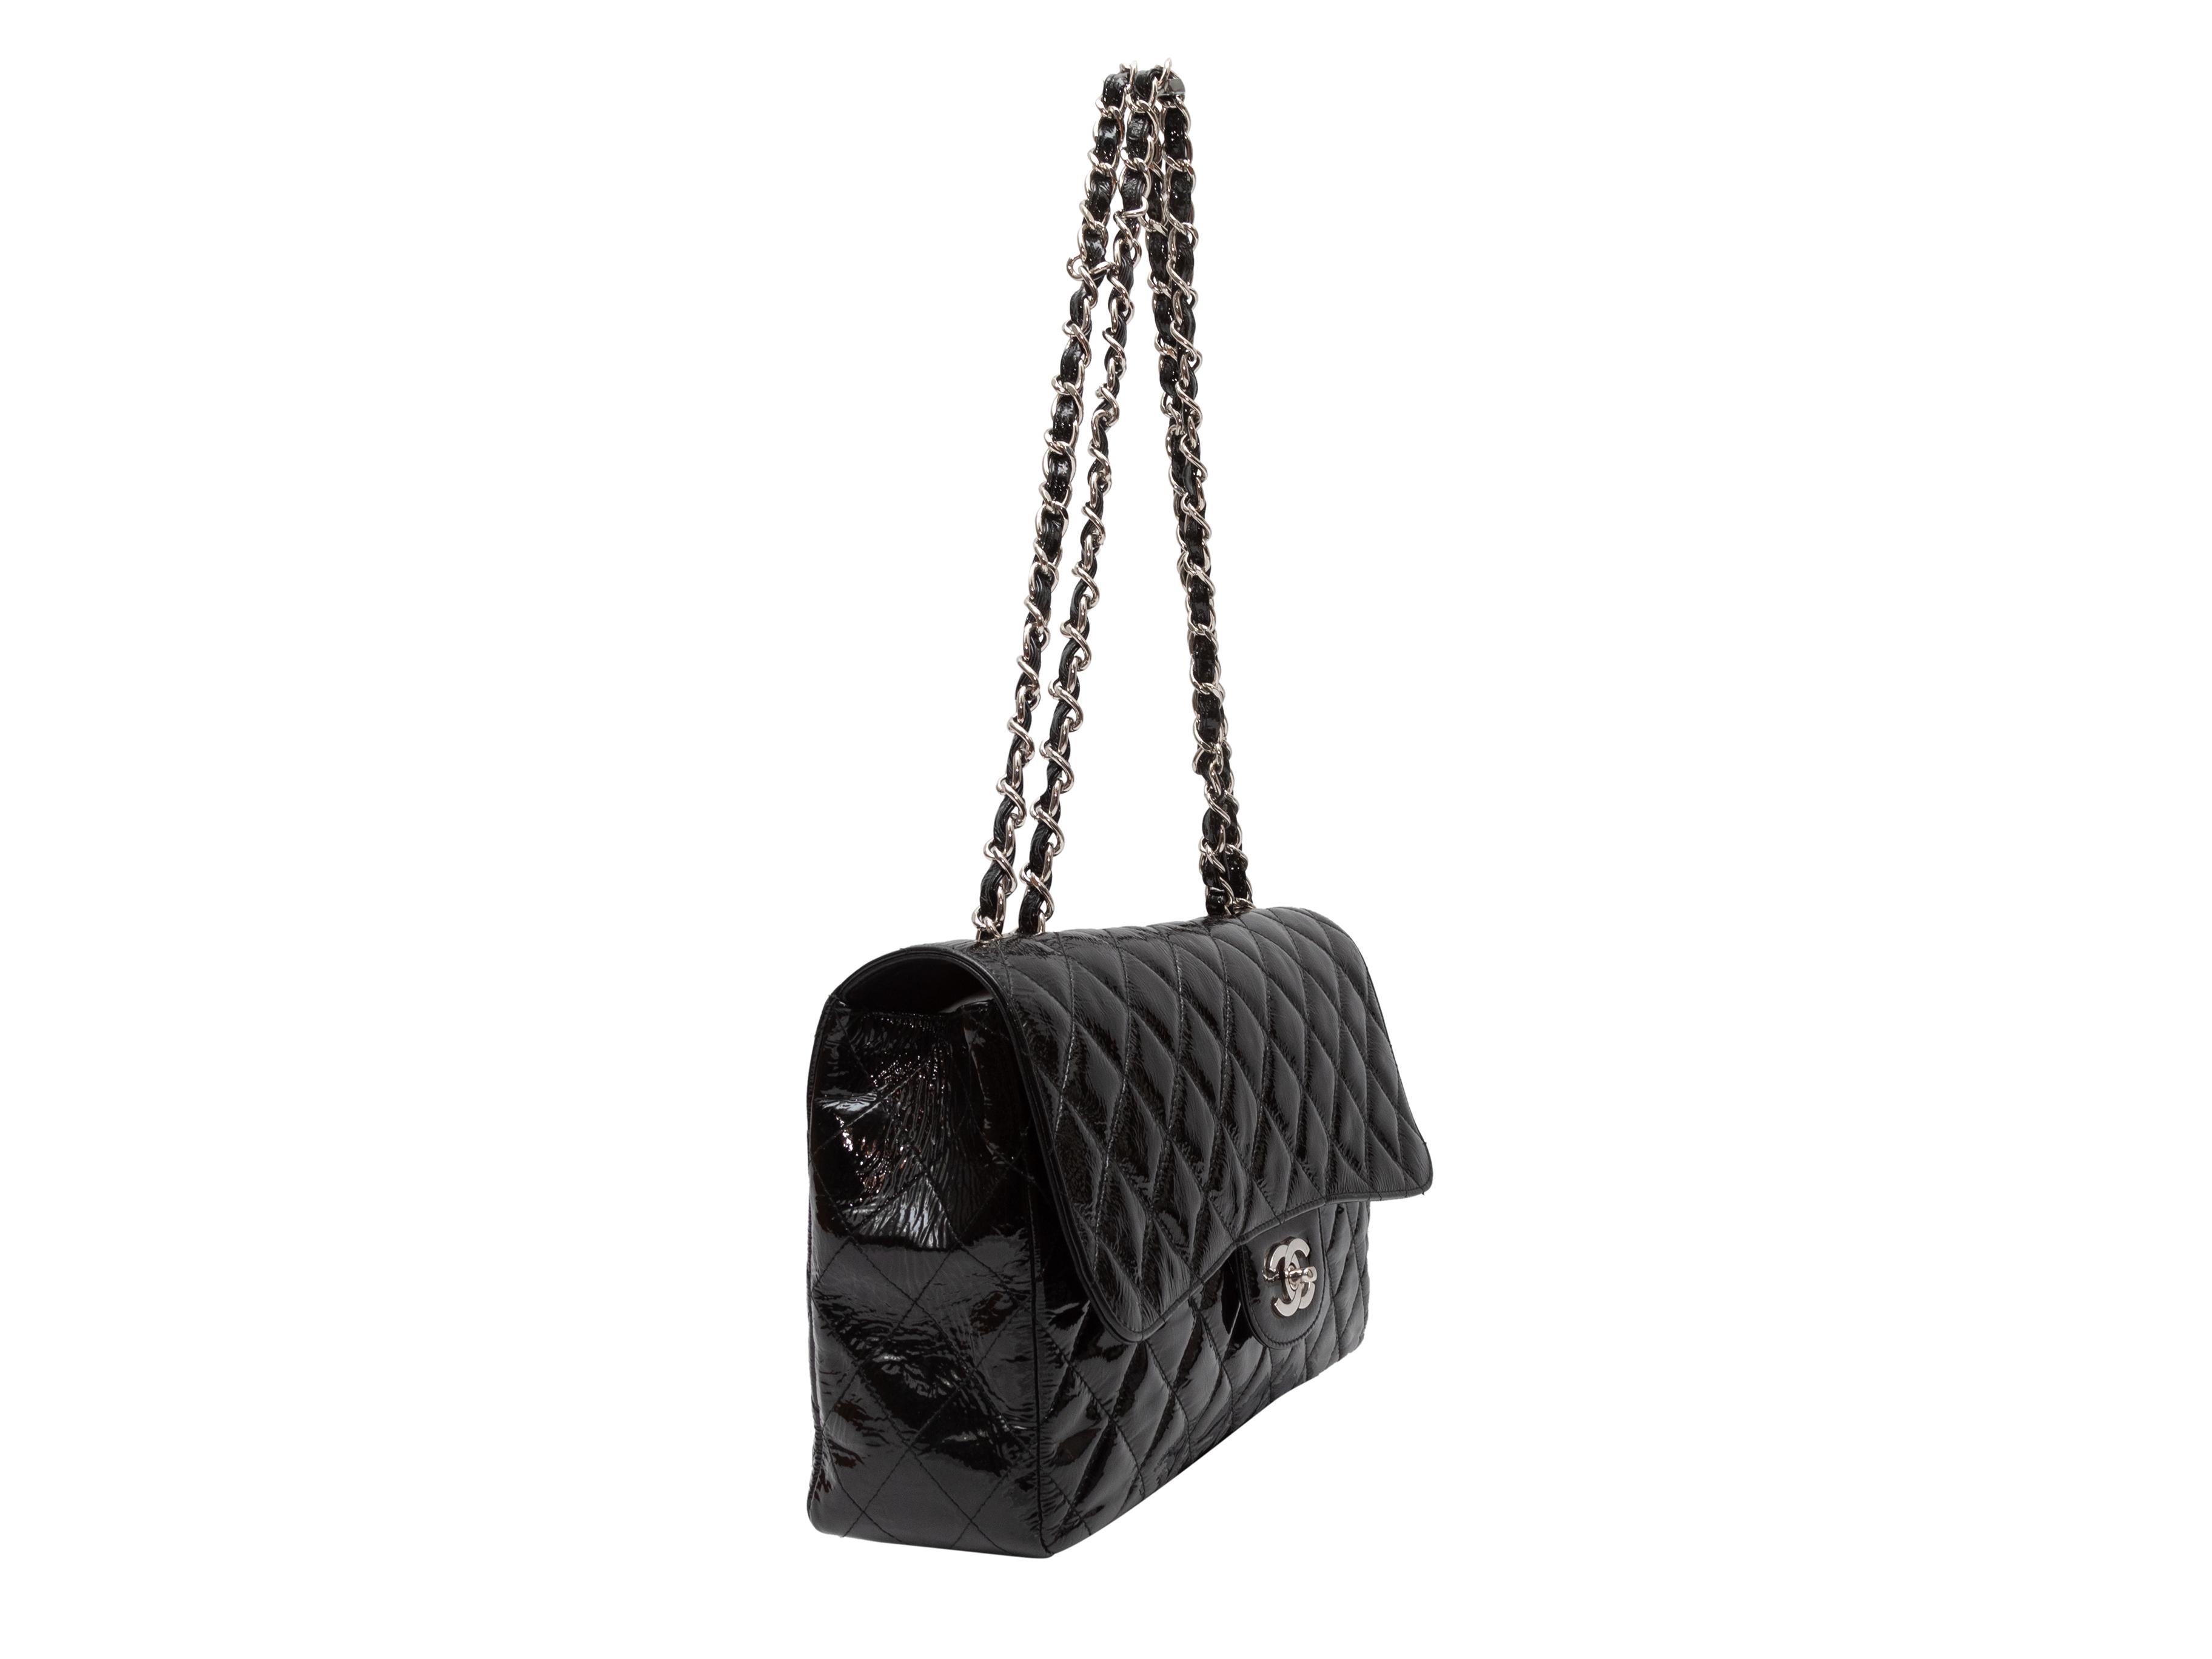 Black Chanel 2006-2009 Medium Timeless Classique Flap Bag. The Timeless Classique bag features a quilted patent leather body, silver-tone hardware, dual chain-link and leather shoulde straps, and a front CC turn-lock flap closure. 11.5